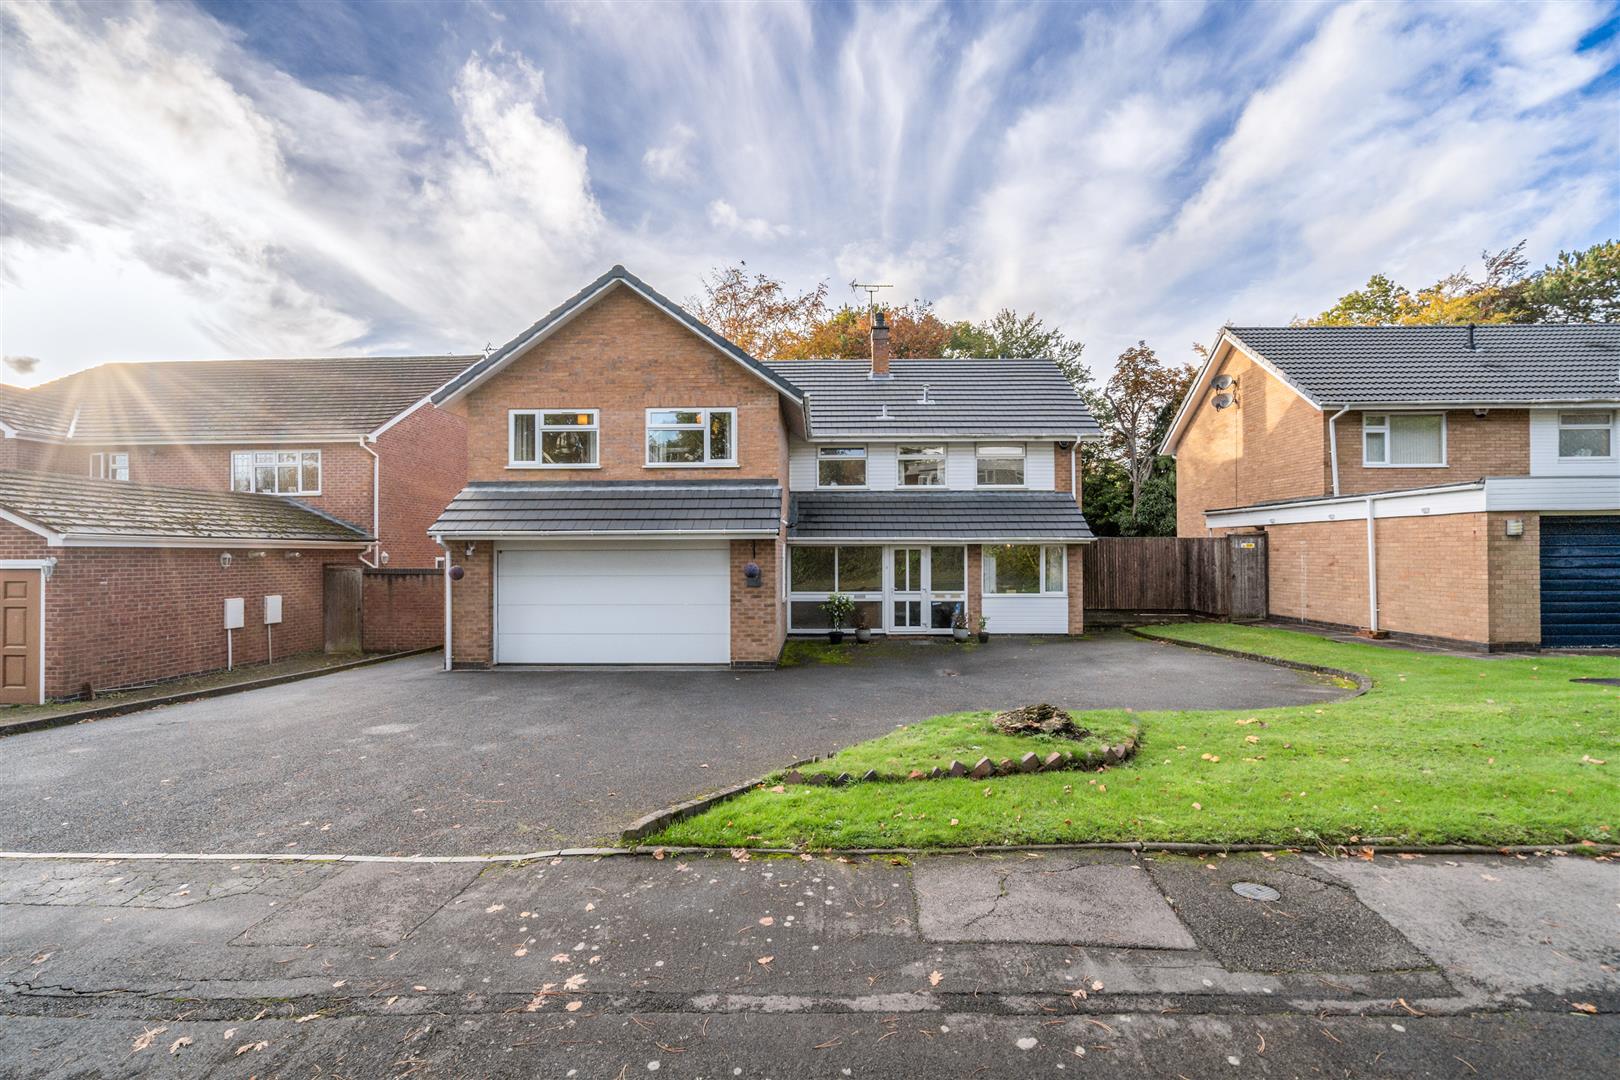 5 bed detached house for sale in White House Way, Solihull  - Property Image 1